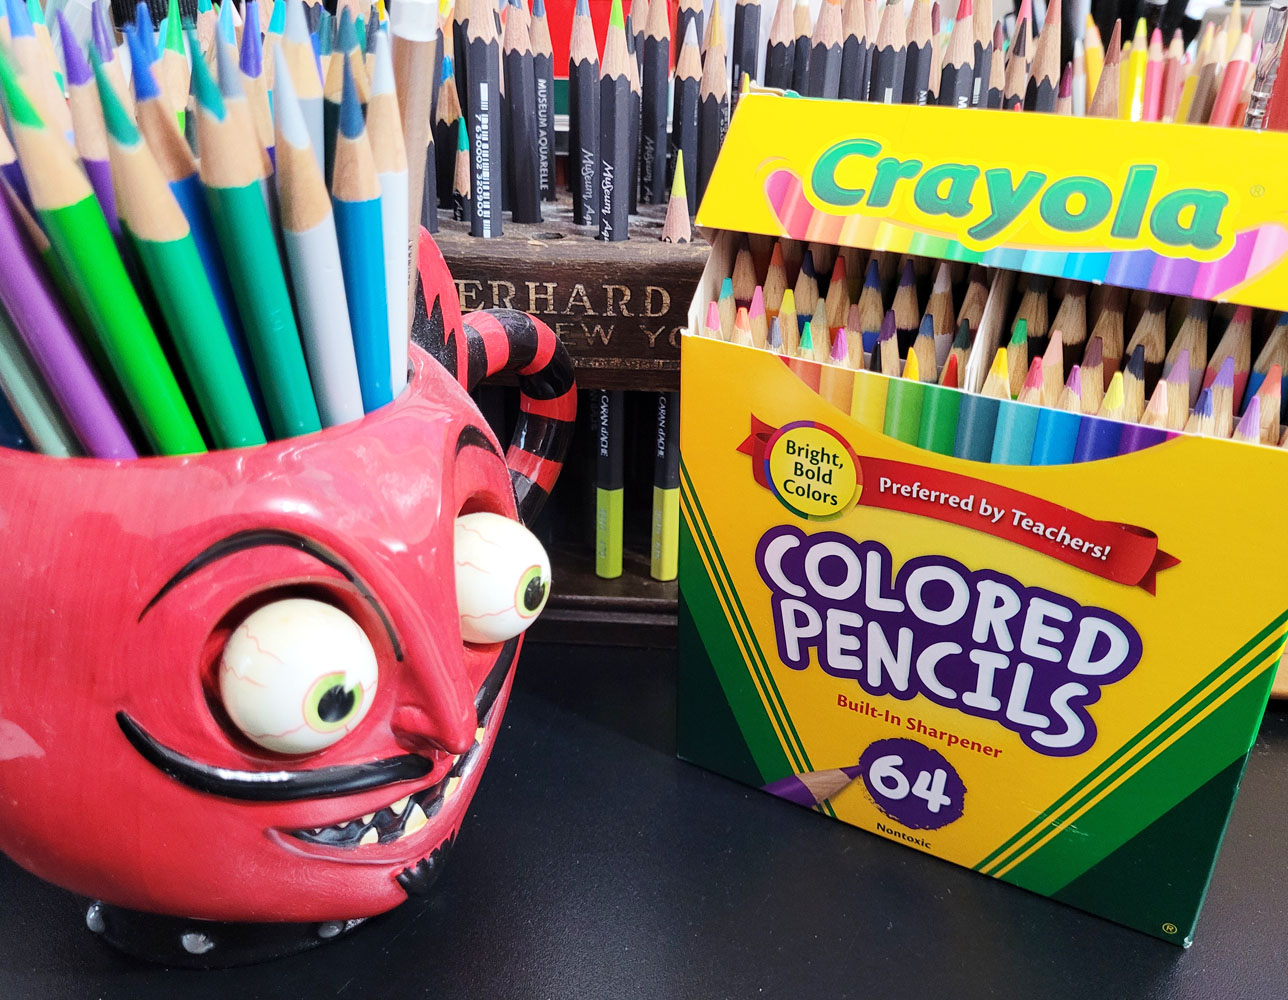 Fueled by Clouds & Coffee: The Crayola Challenge